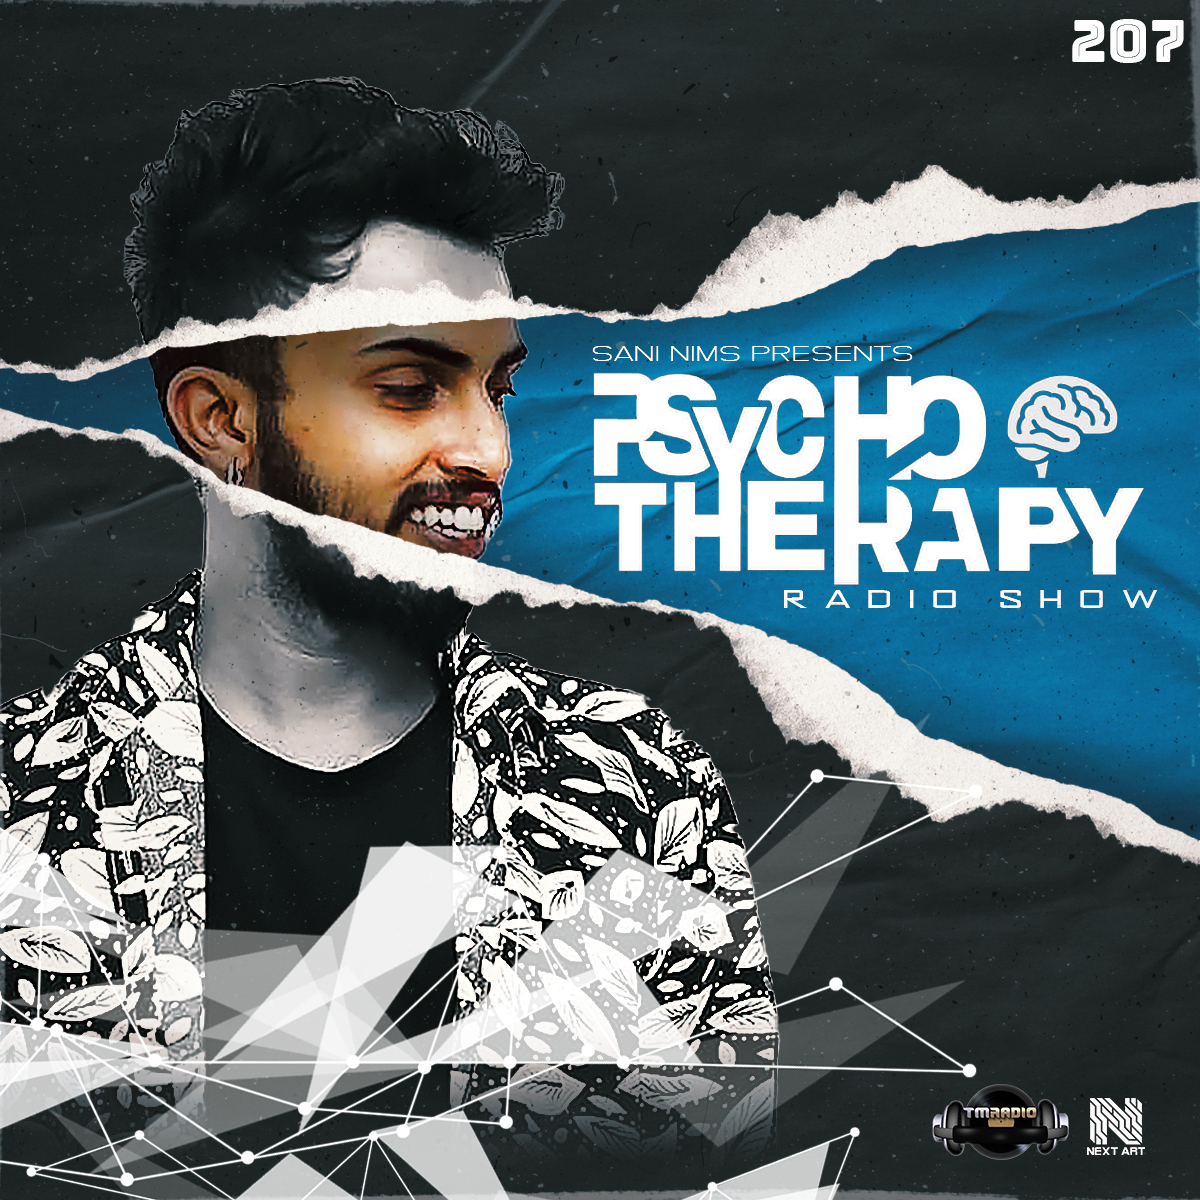 PSYCHO THERAPY EP 207 BY SANI NIMS ON TM RADIO (from September 21st)